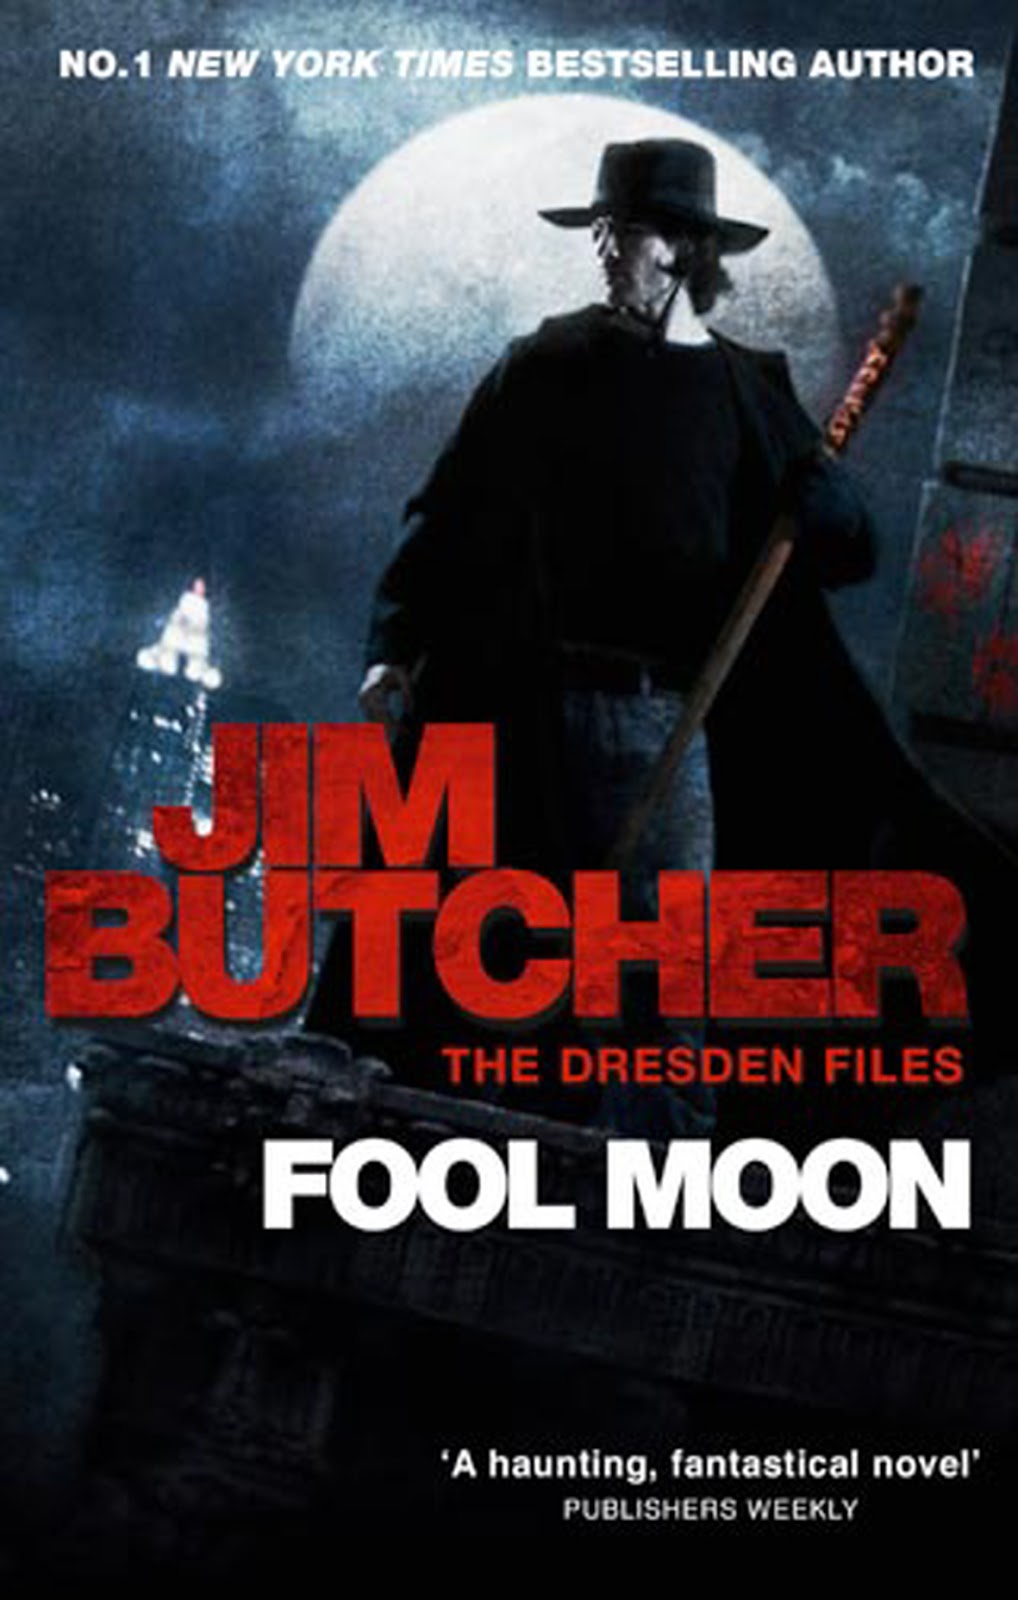 The Dresden Files: Fool Moon, Volume 1 by Jim Butcher